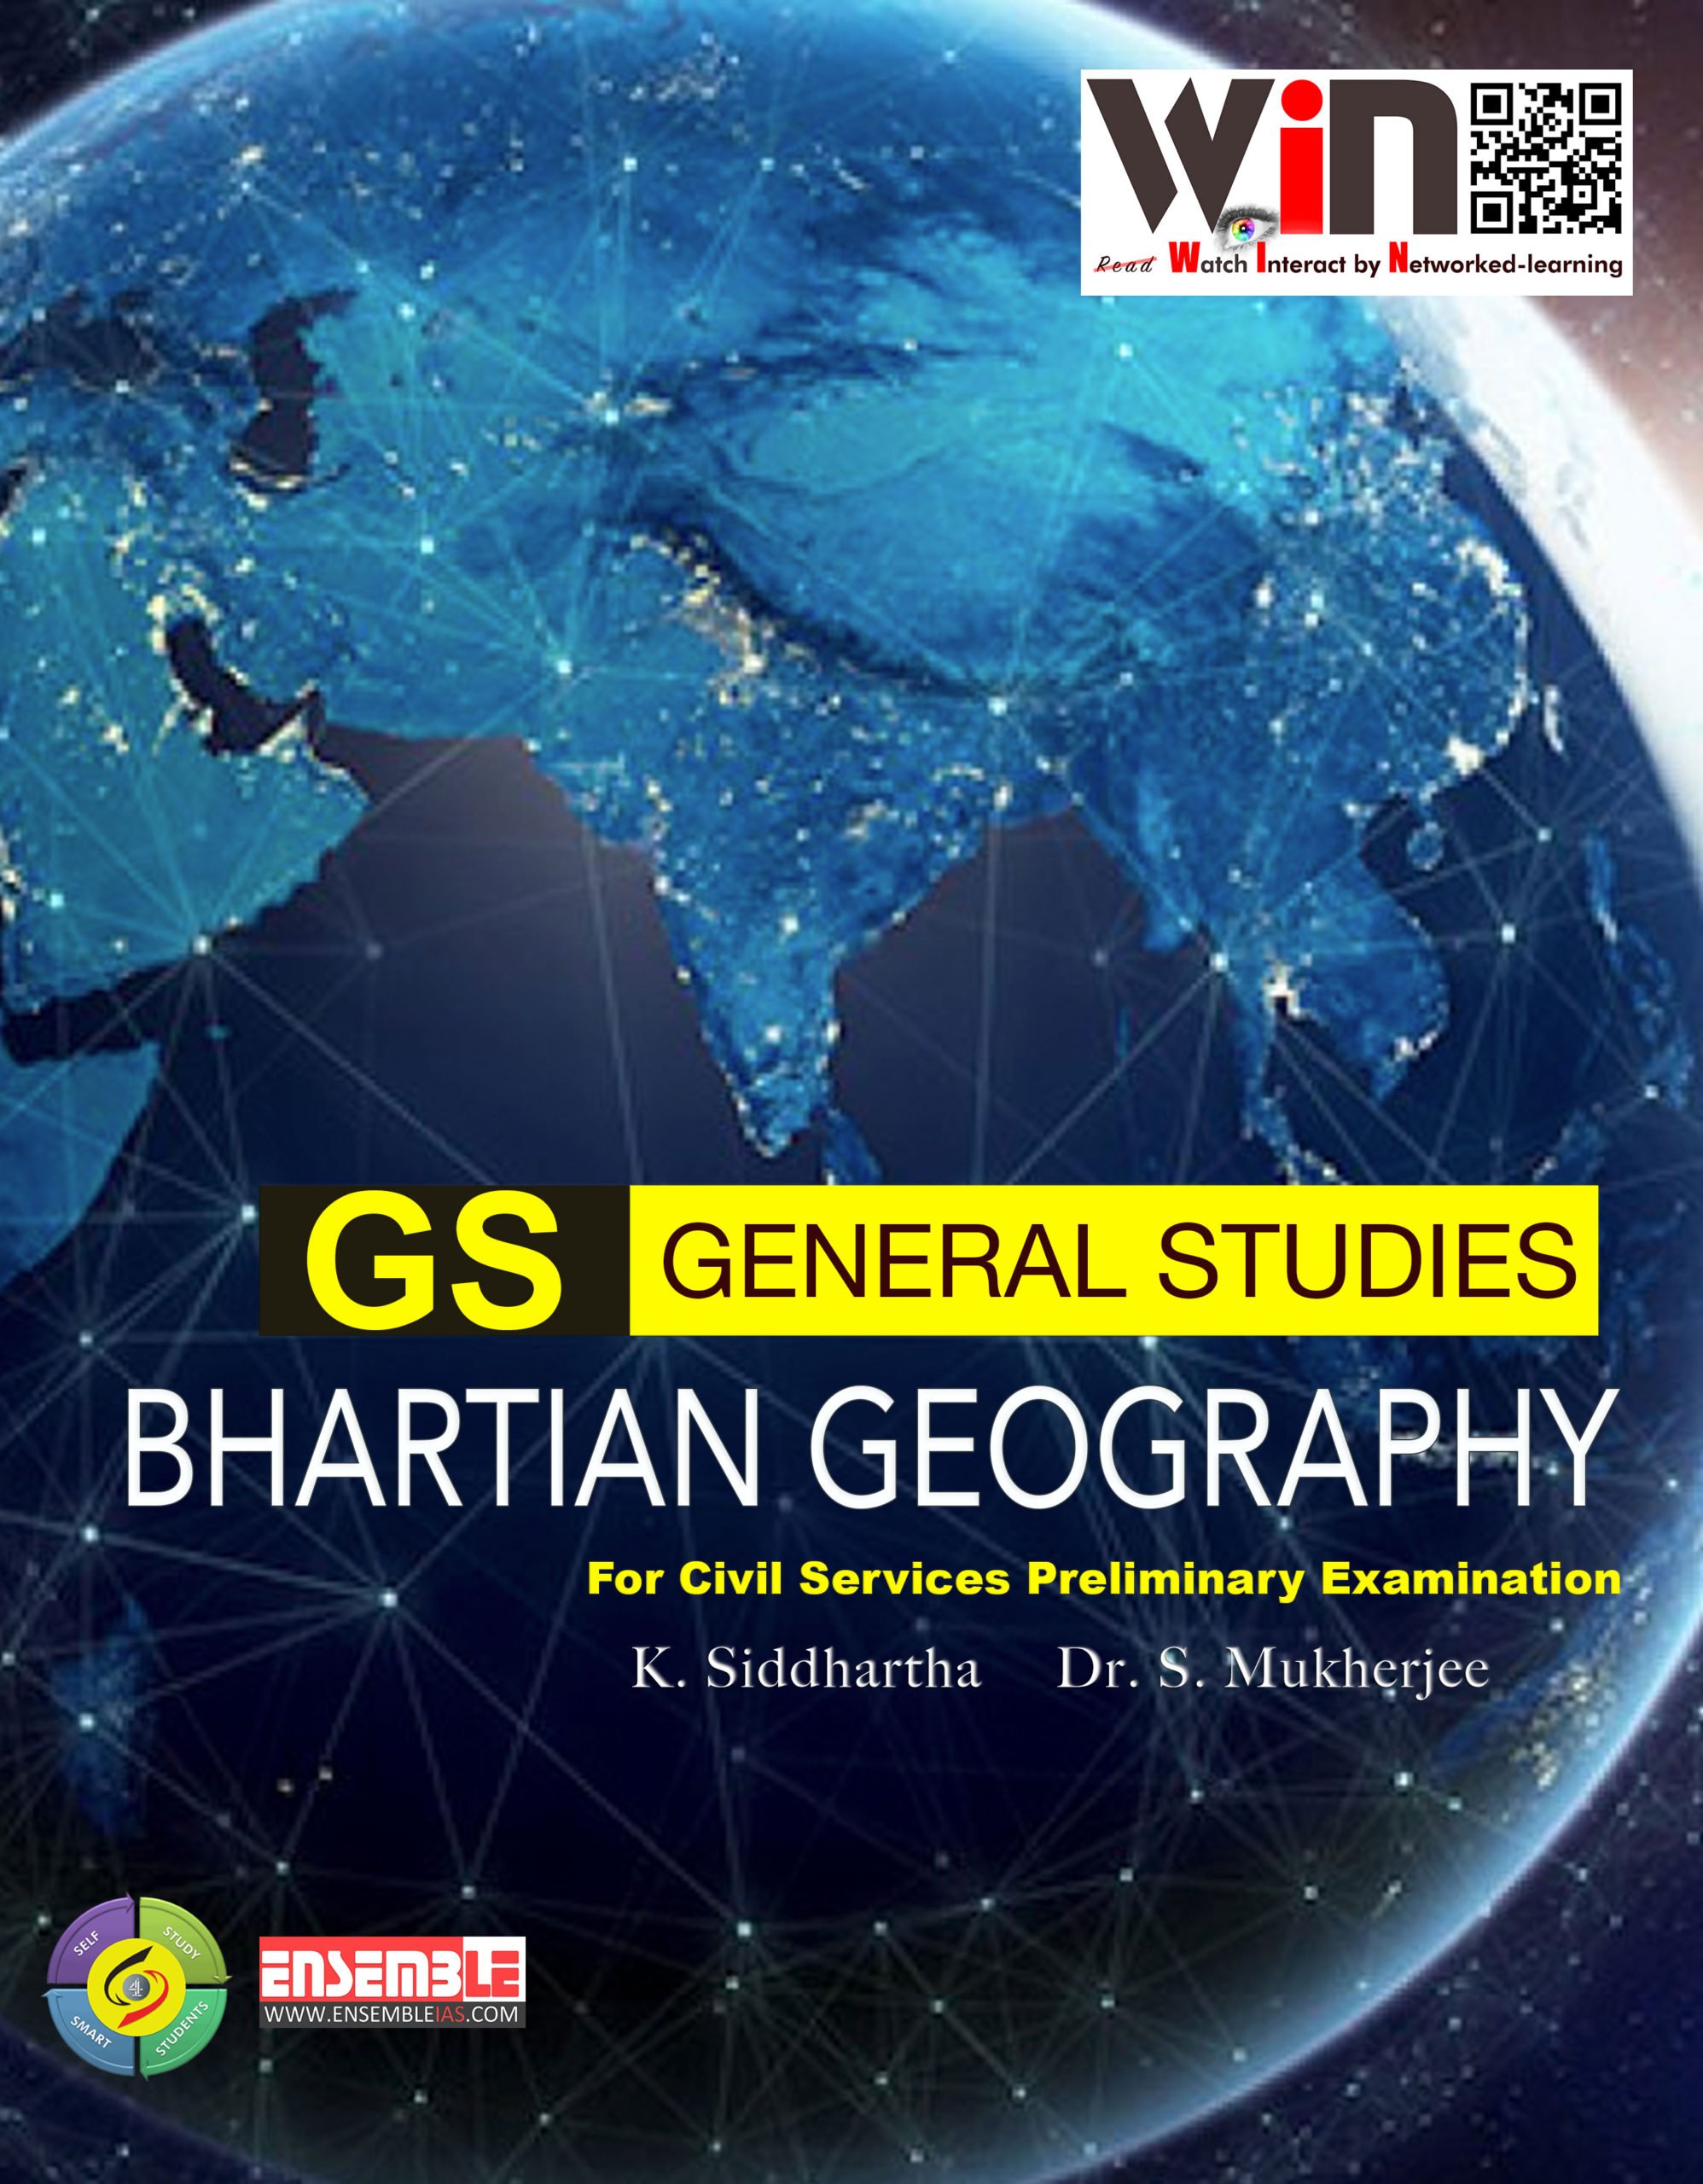 Bhartian Geography for Prelims - Book